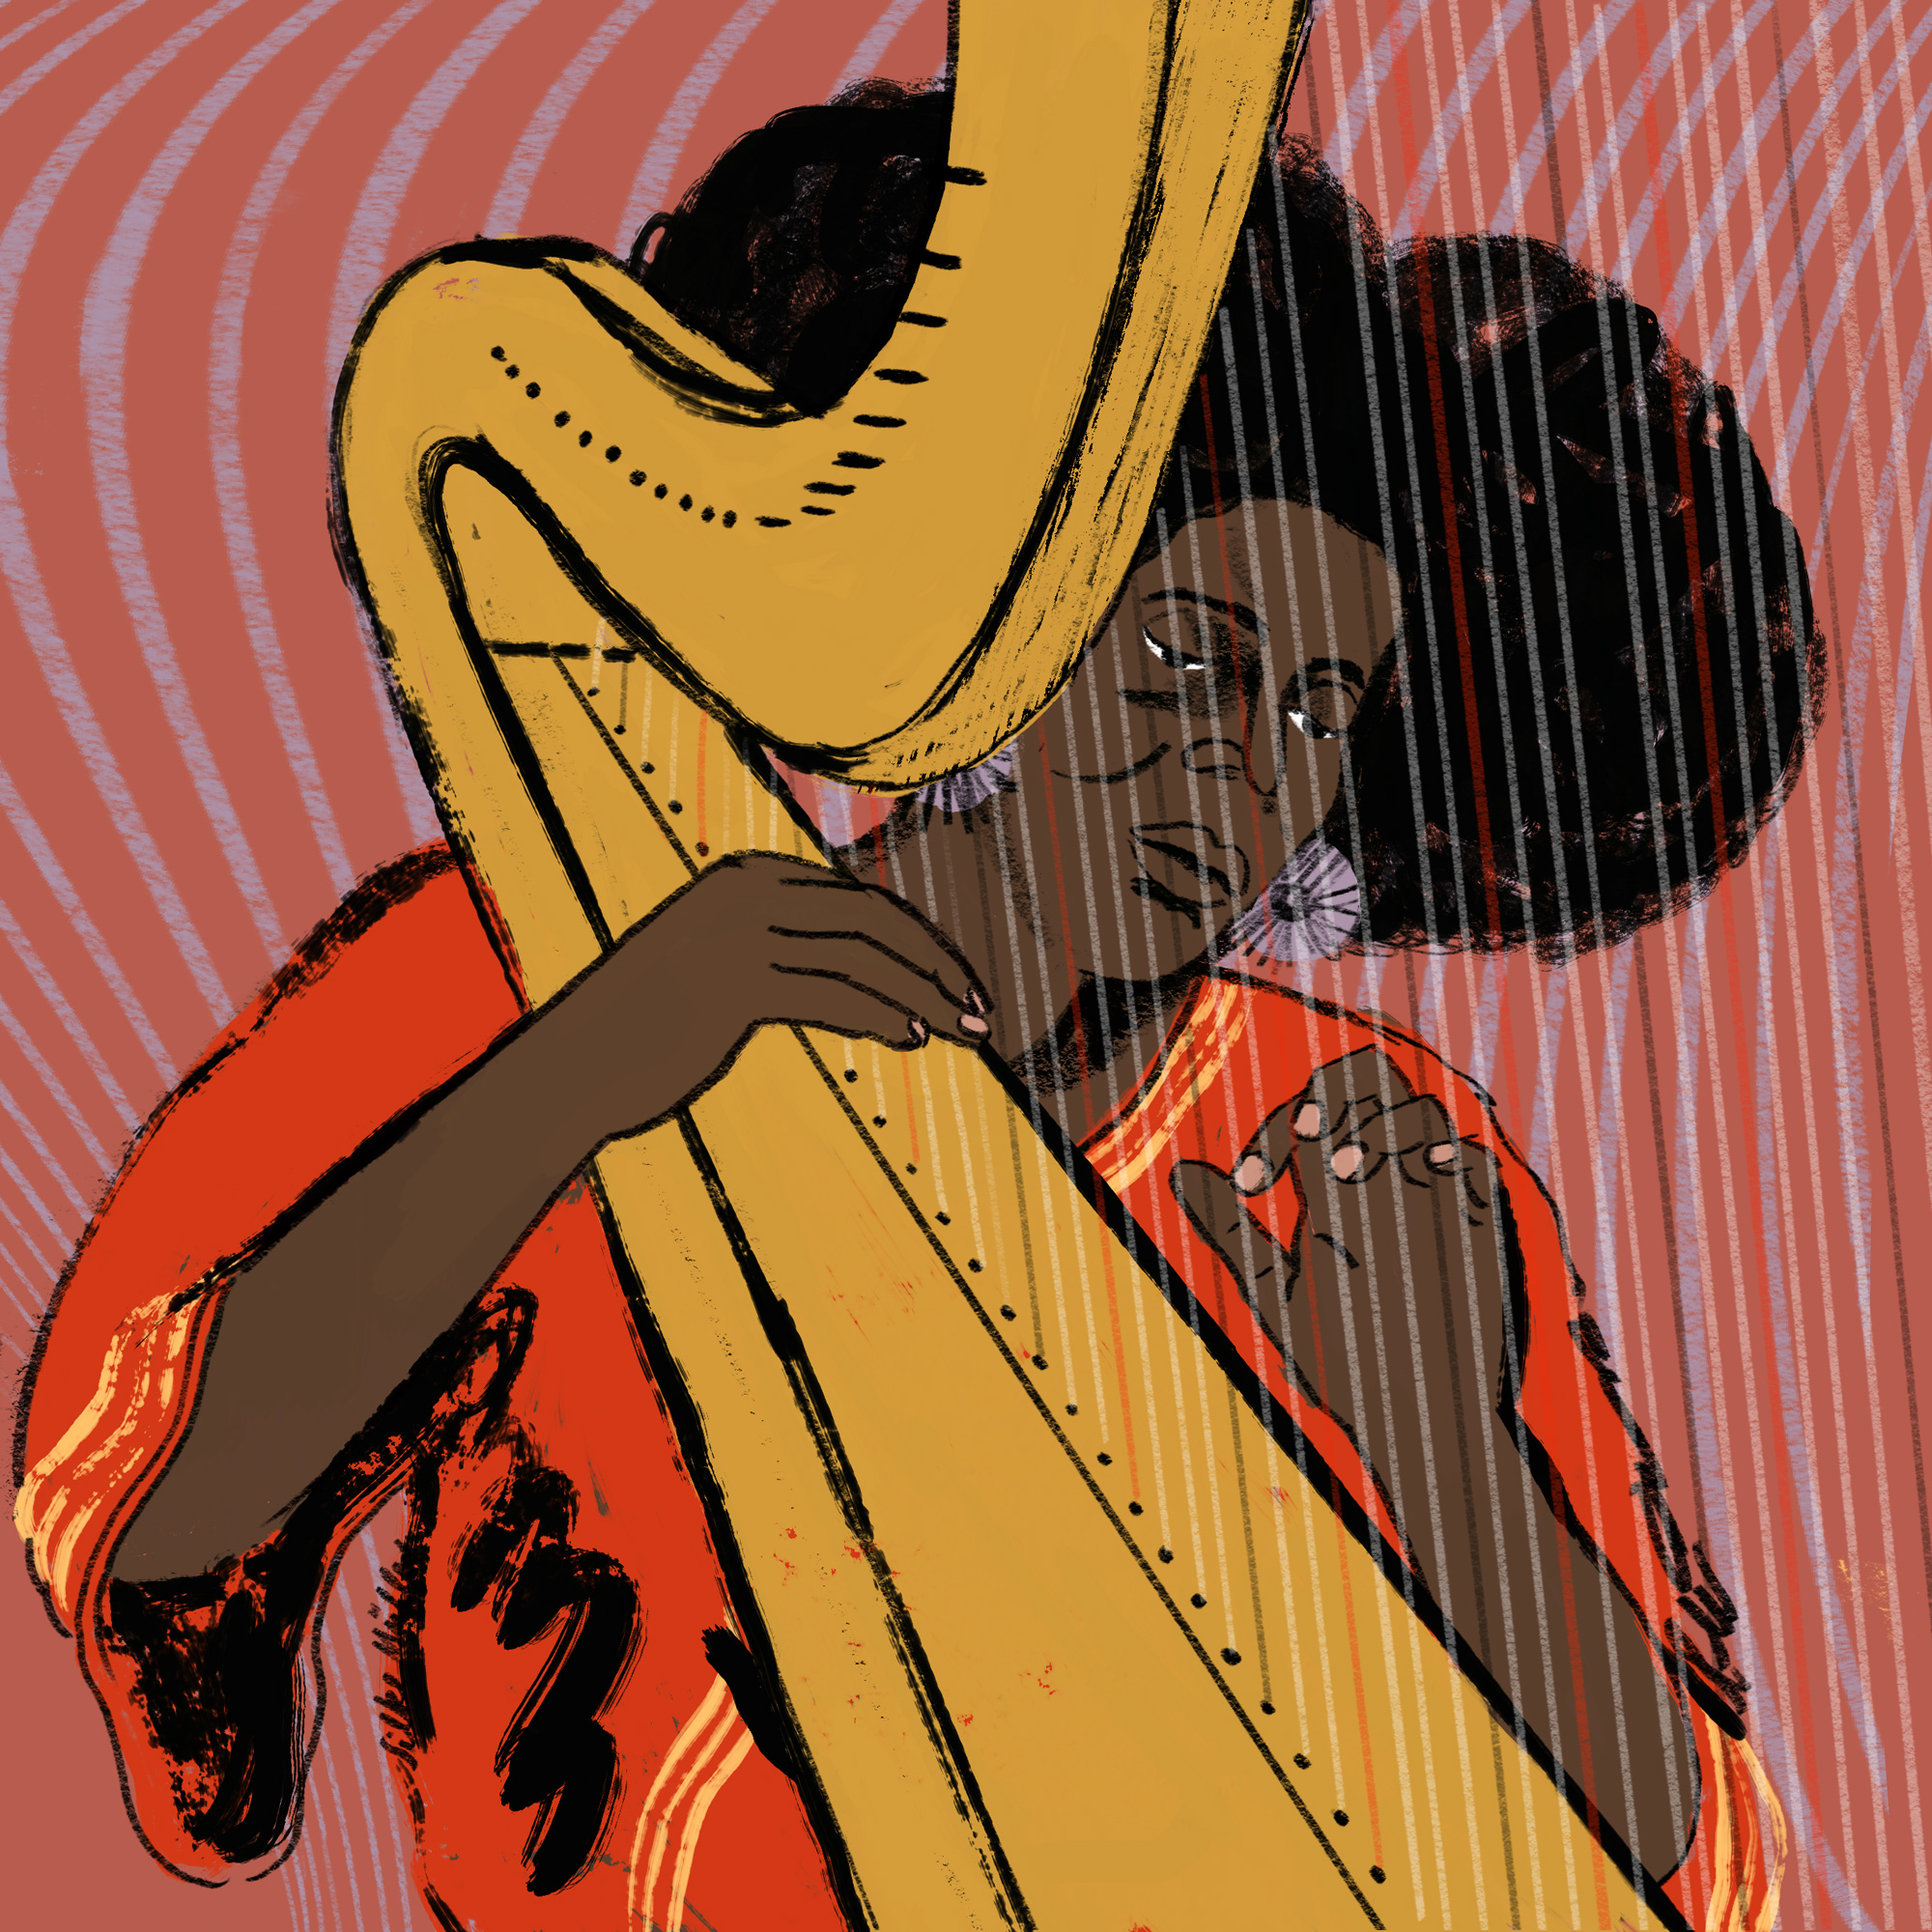 Alice Coltrane playing the harp